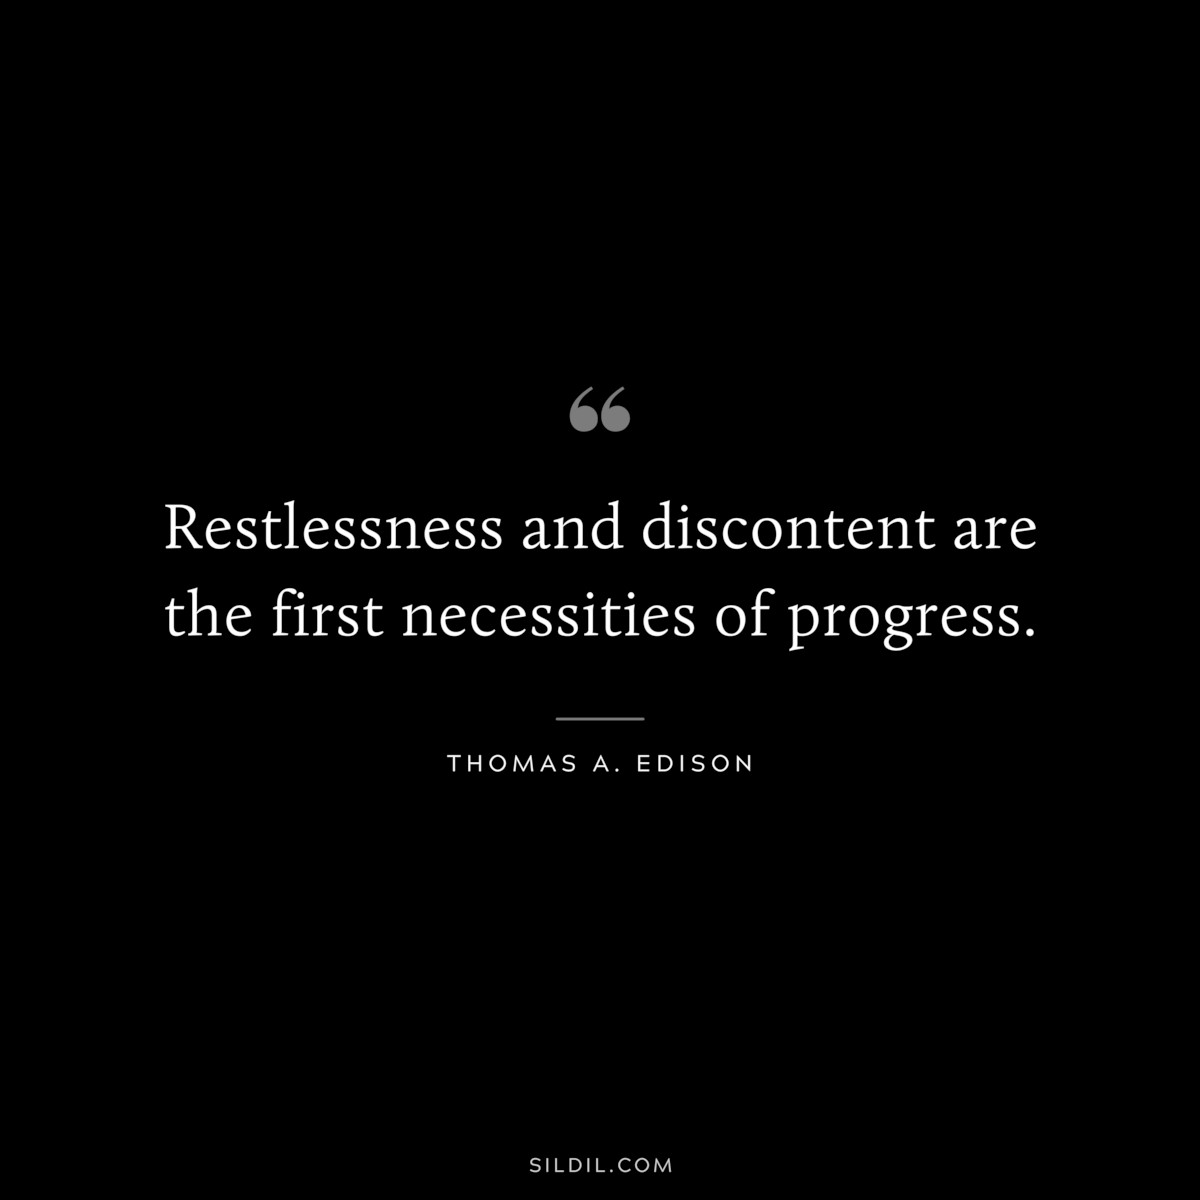 Restlessness and discontent are the first necessities of progress. ― Thomas A. Edison